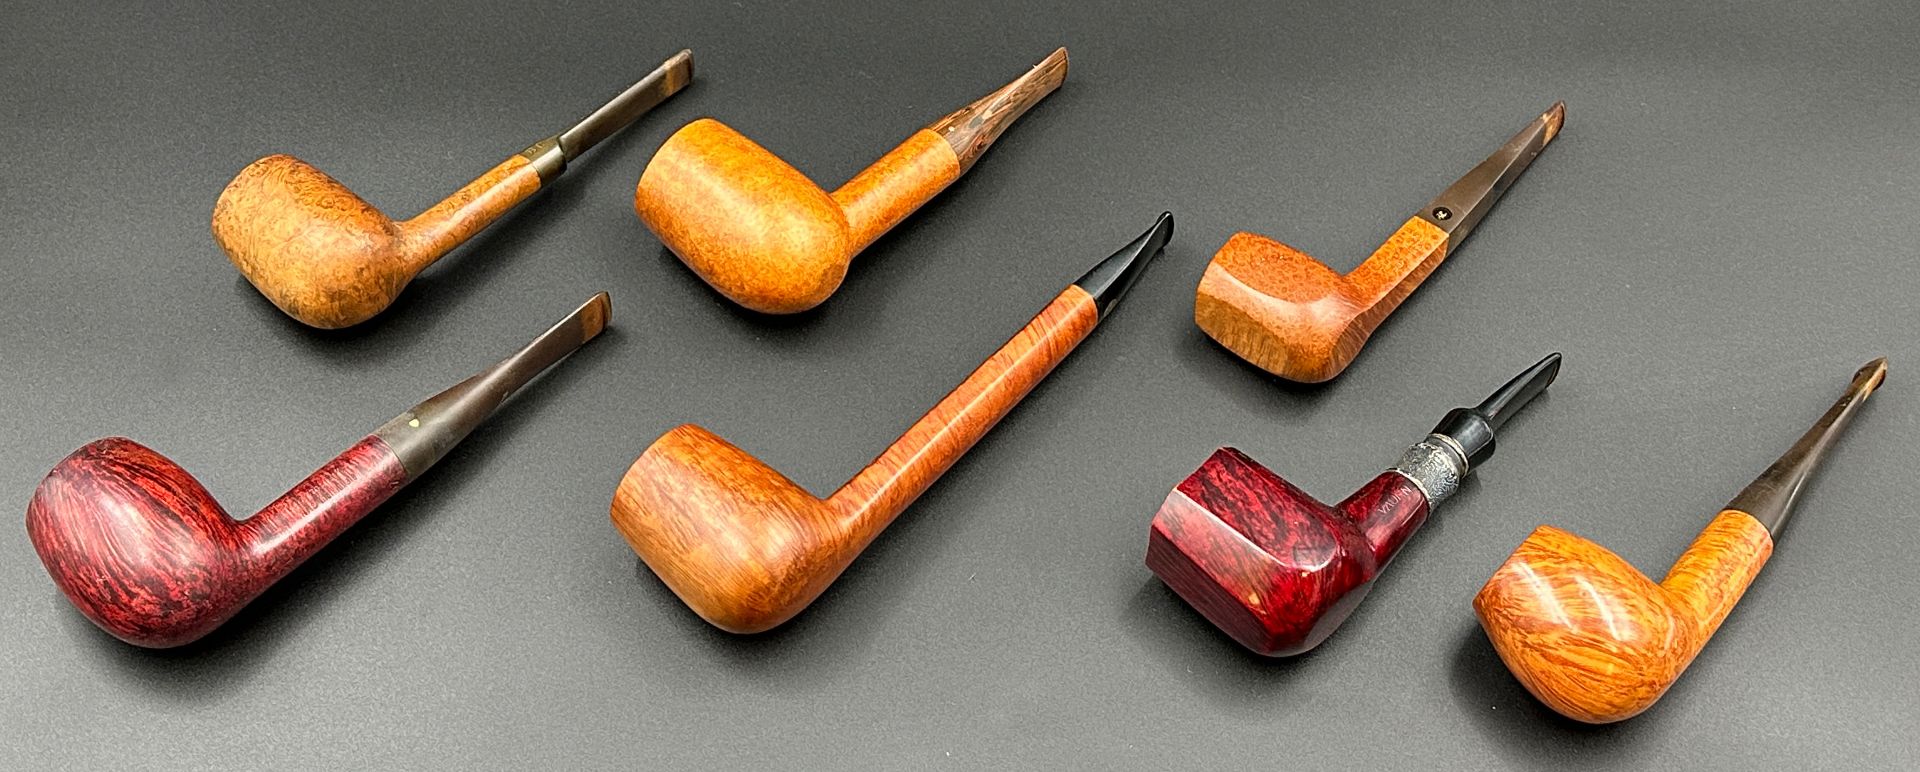 Seven tobacco pipes. VAUEN. BUTZ CHOQUIN, KAI NIELSEN and others.